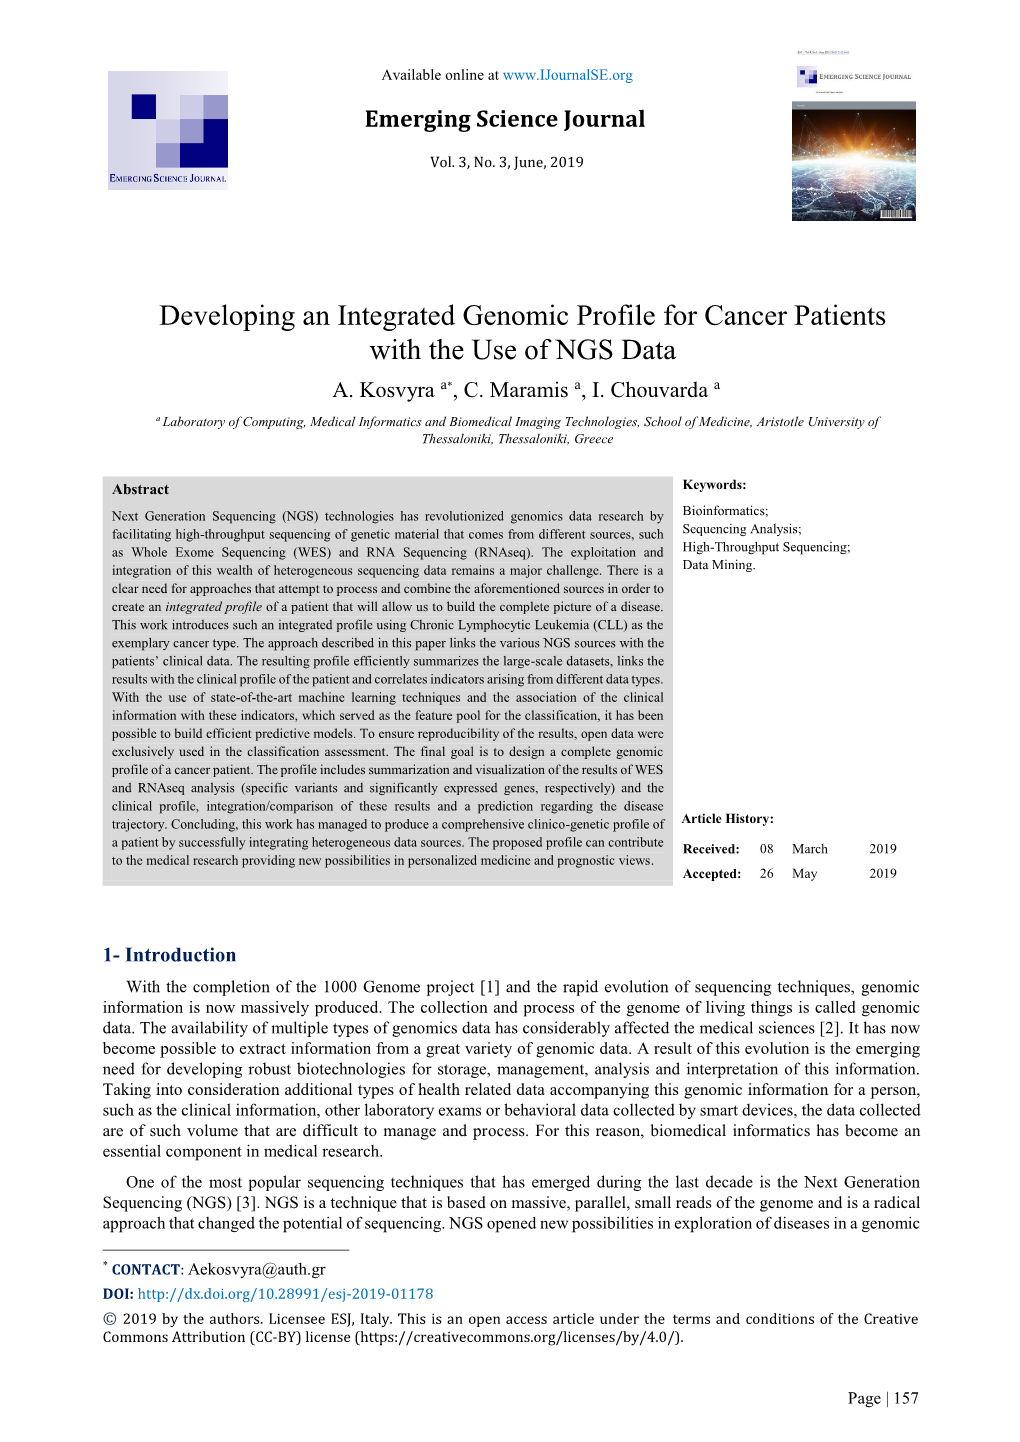 Developing an Integrated Genomic Profile for Cancer Patients with the Use of NGS Data A